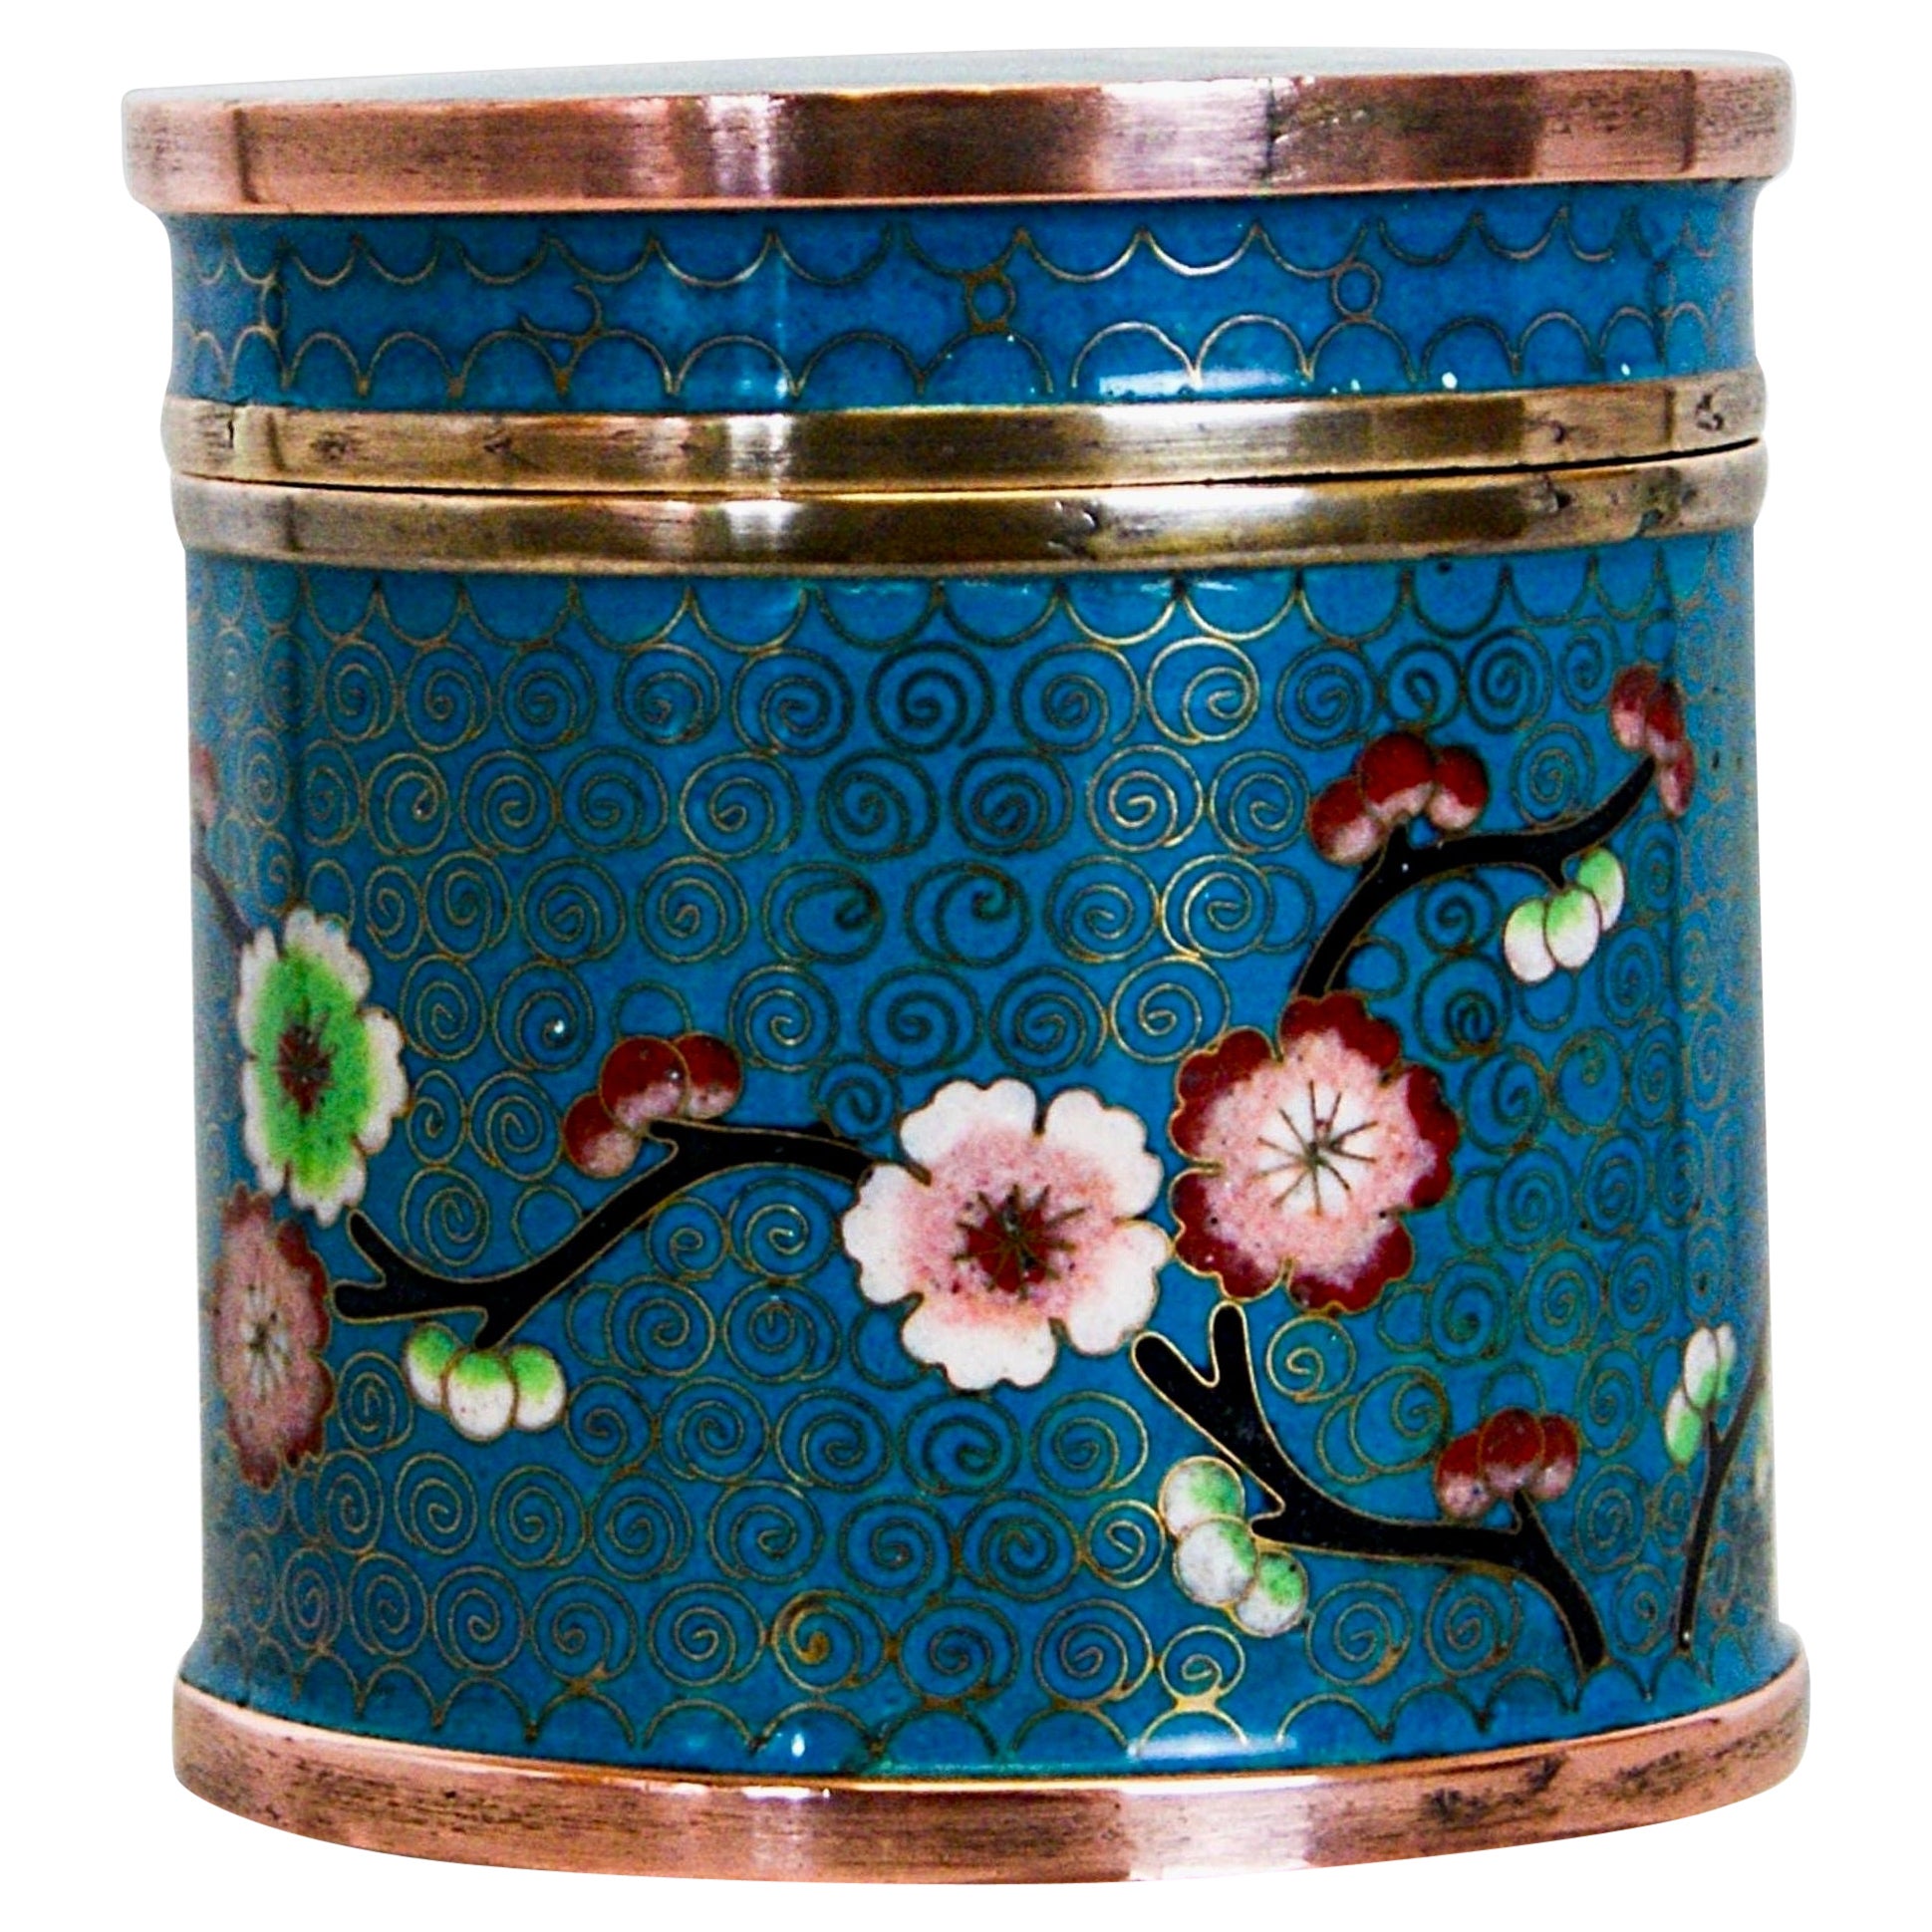 Antique Chinoiserie Cloisonné on Copper and Brass Enamel Lidded Storage Jar